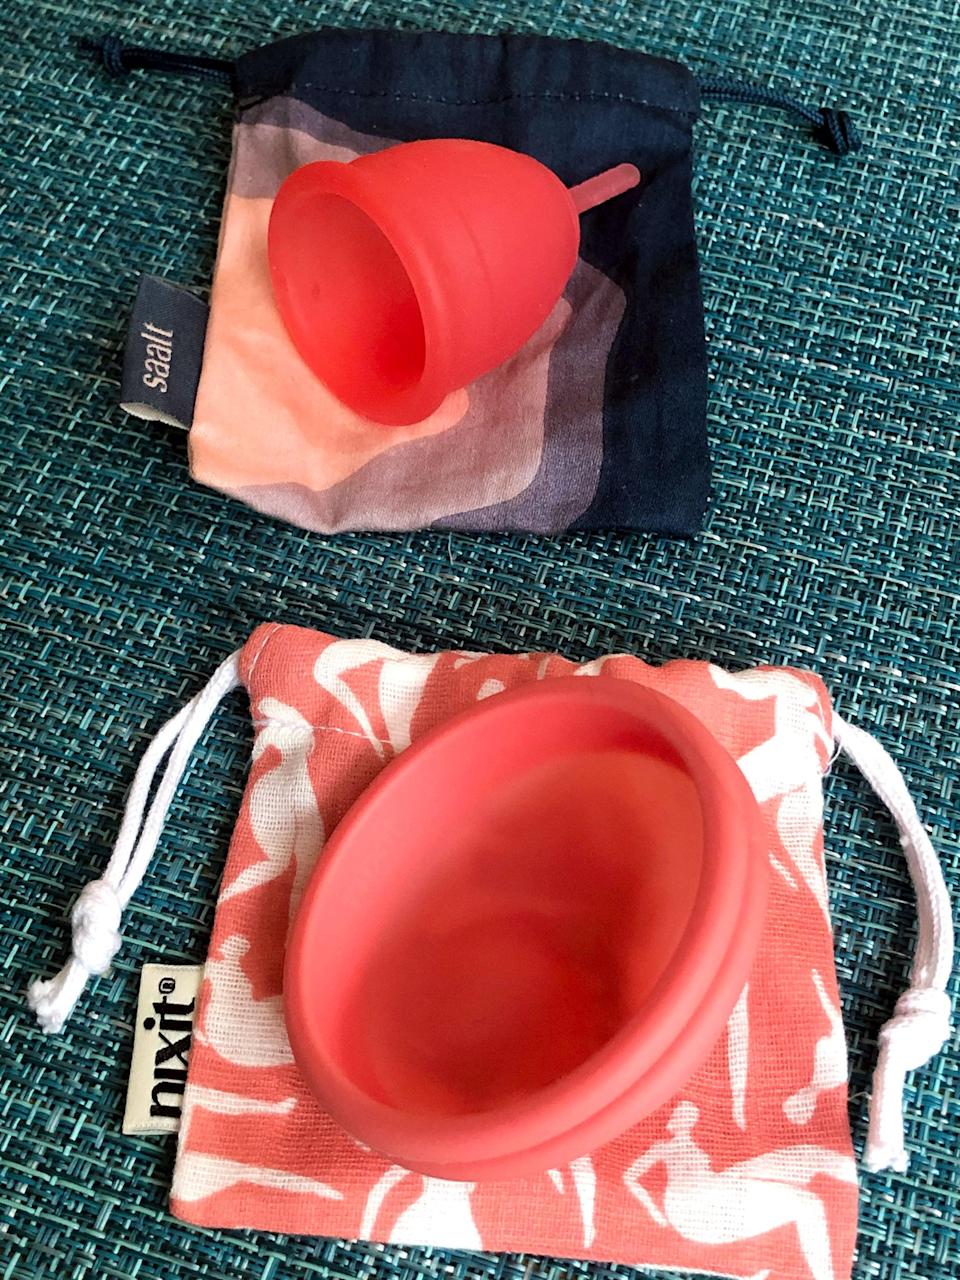 I Tried a Menstrual Cup and a Menstrual Disc